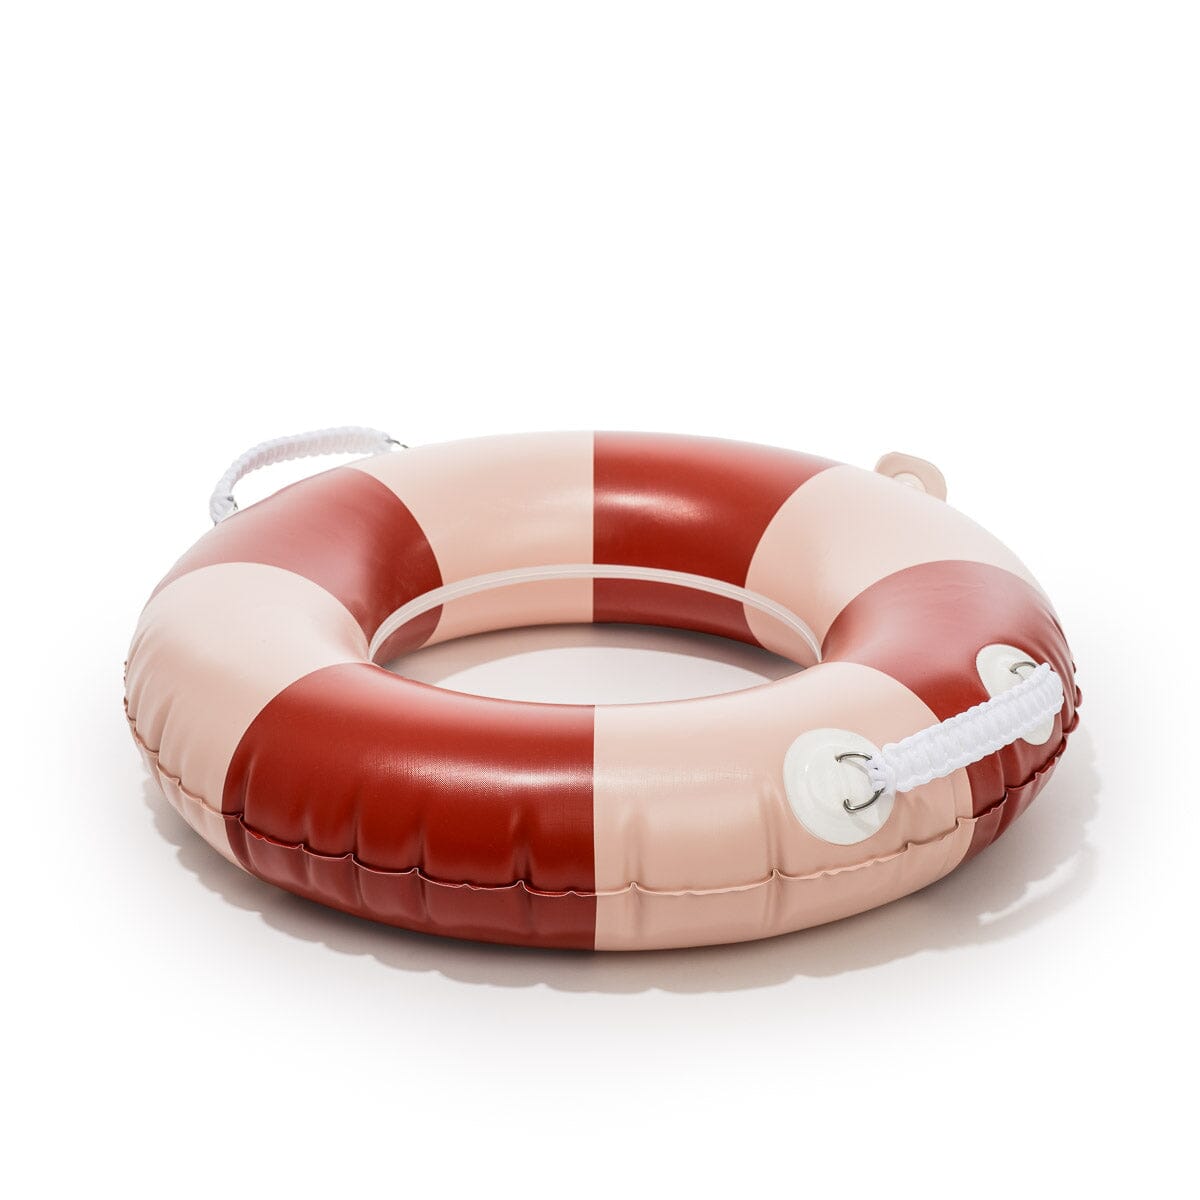 The Classic Pool Float - Small - Rivie Pink Pool Float Business & Pleasure Co 